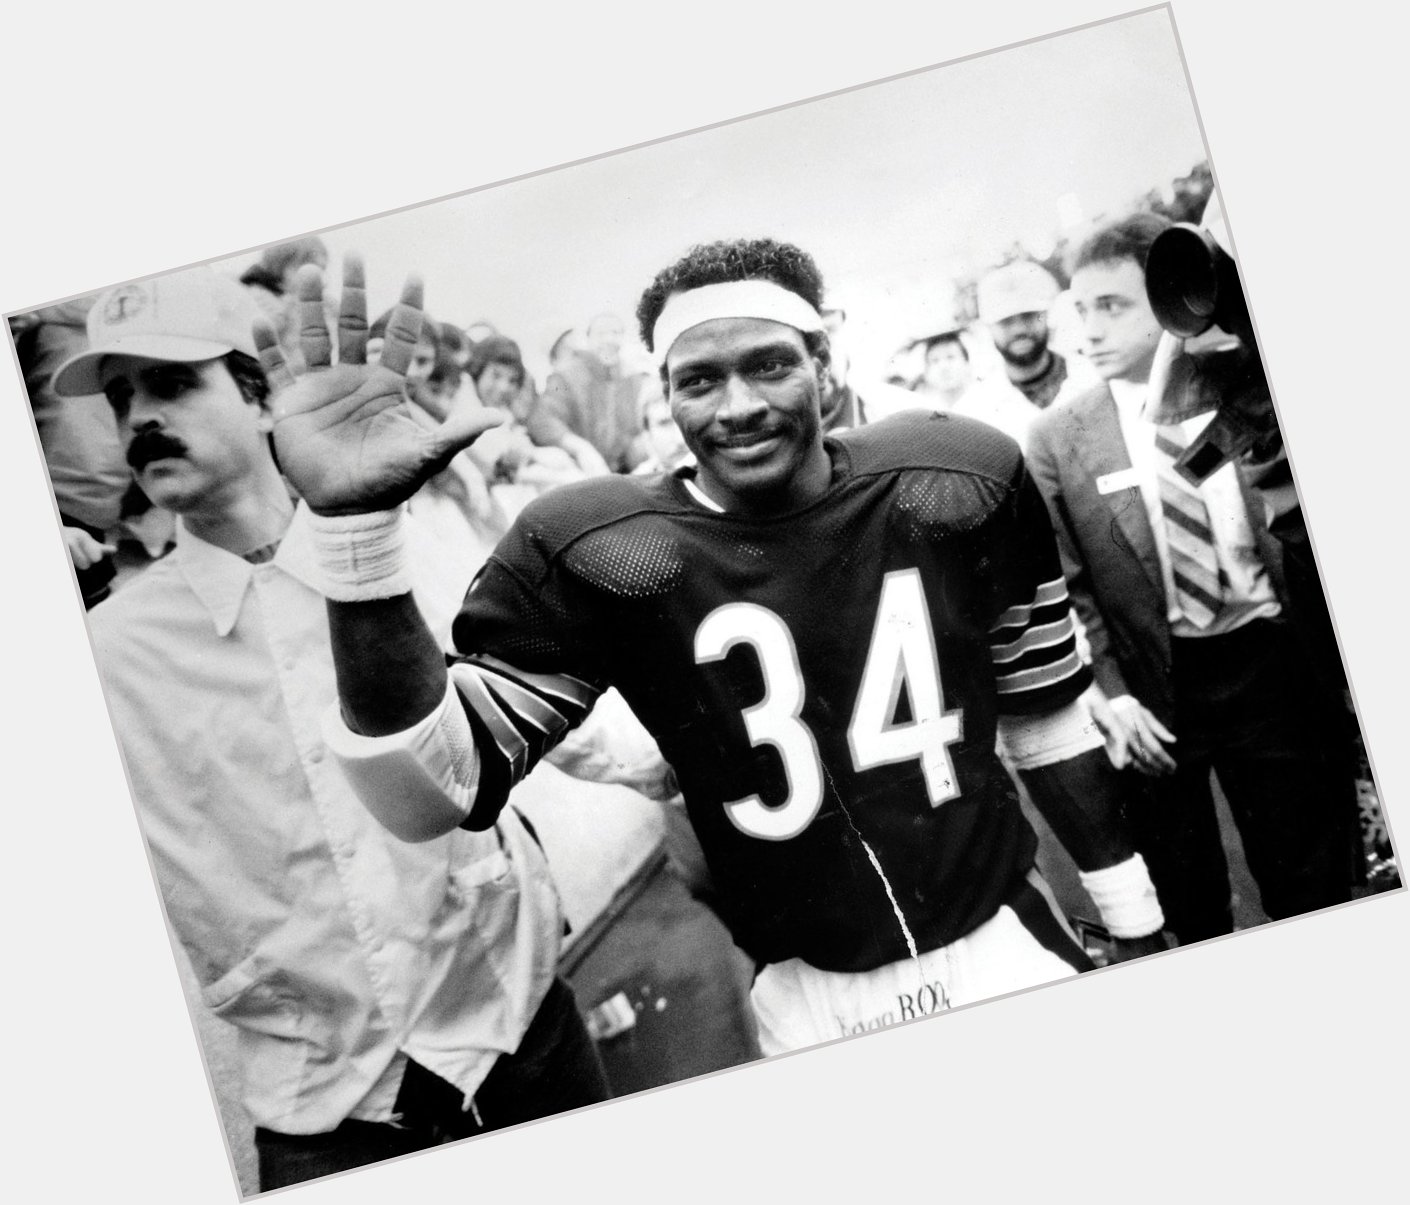 Happy Birthday, Sweetness.

Walter Payton would have turned 65 today. What is your favorite memory of 